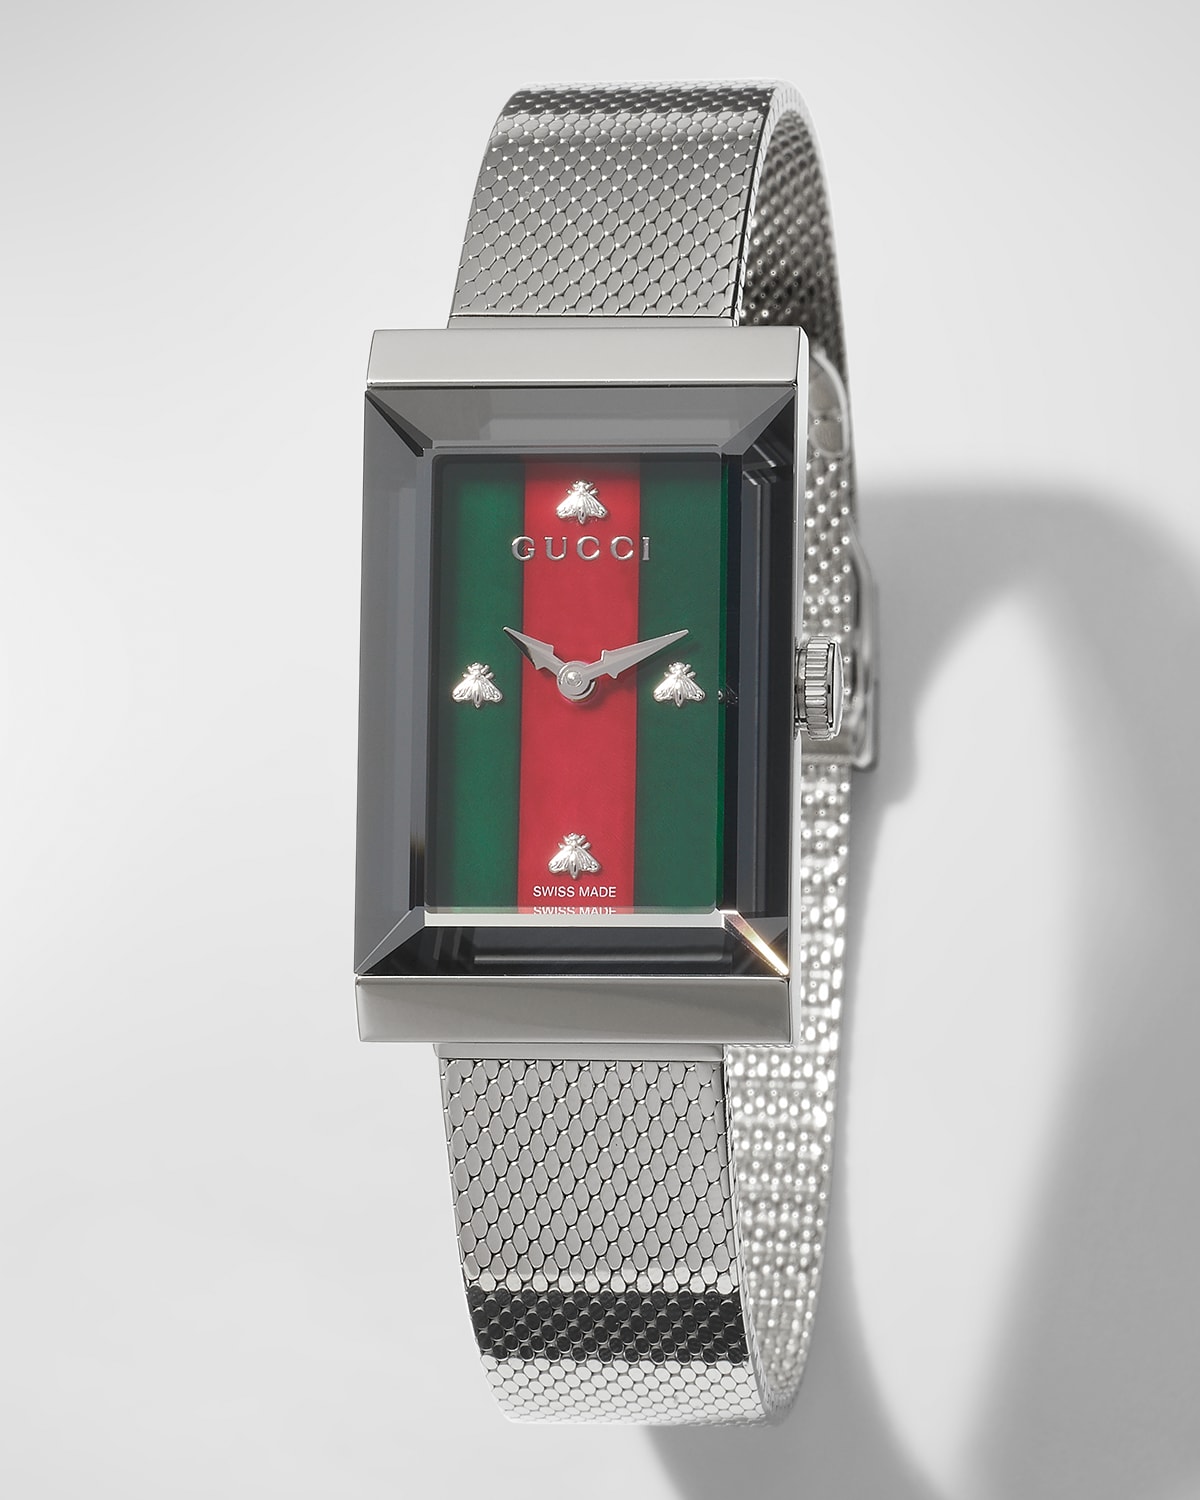 Gucci G-frame Rectangular Mother-of-pearl Watch W/ Mesh Strap